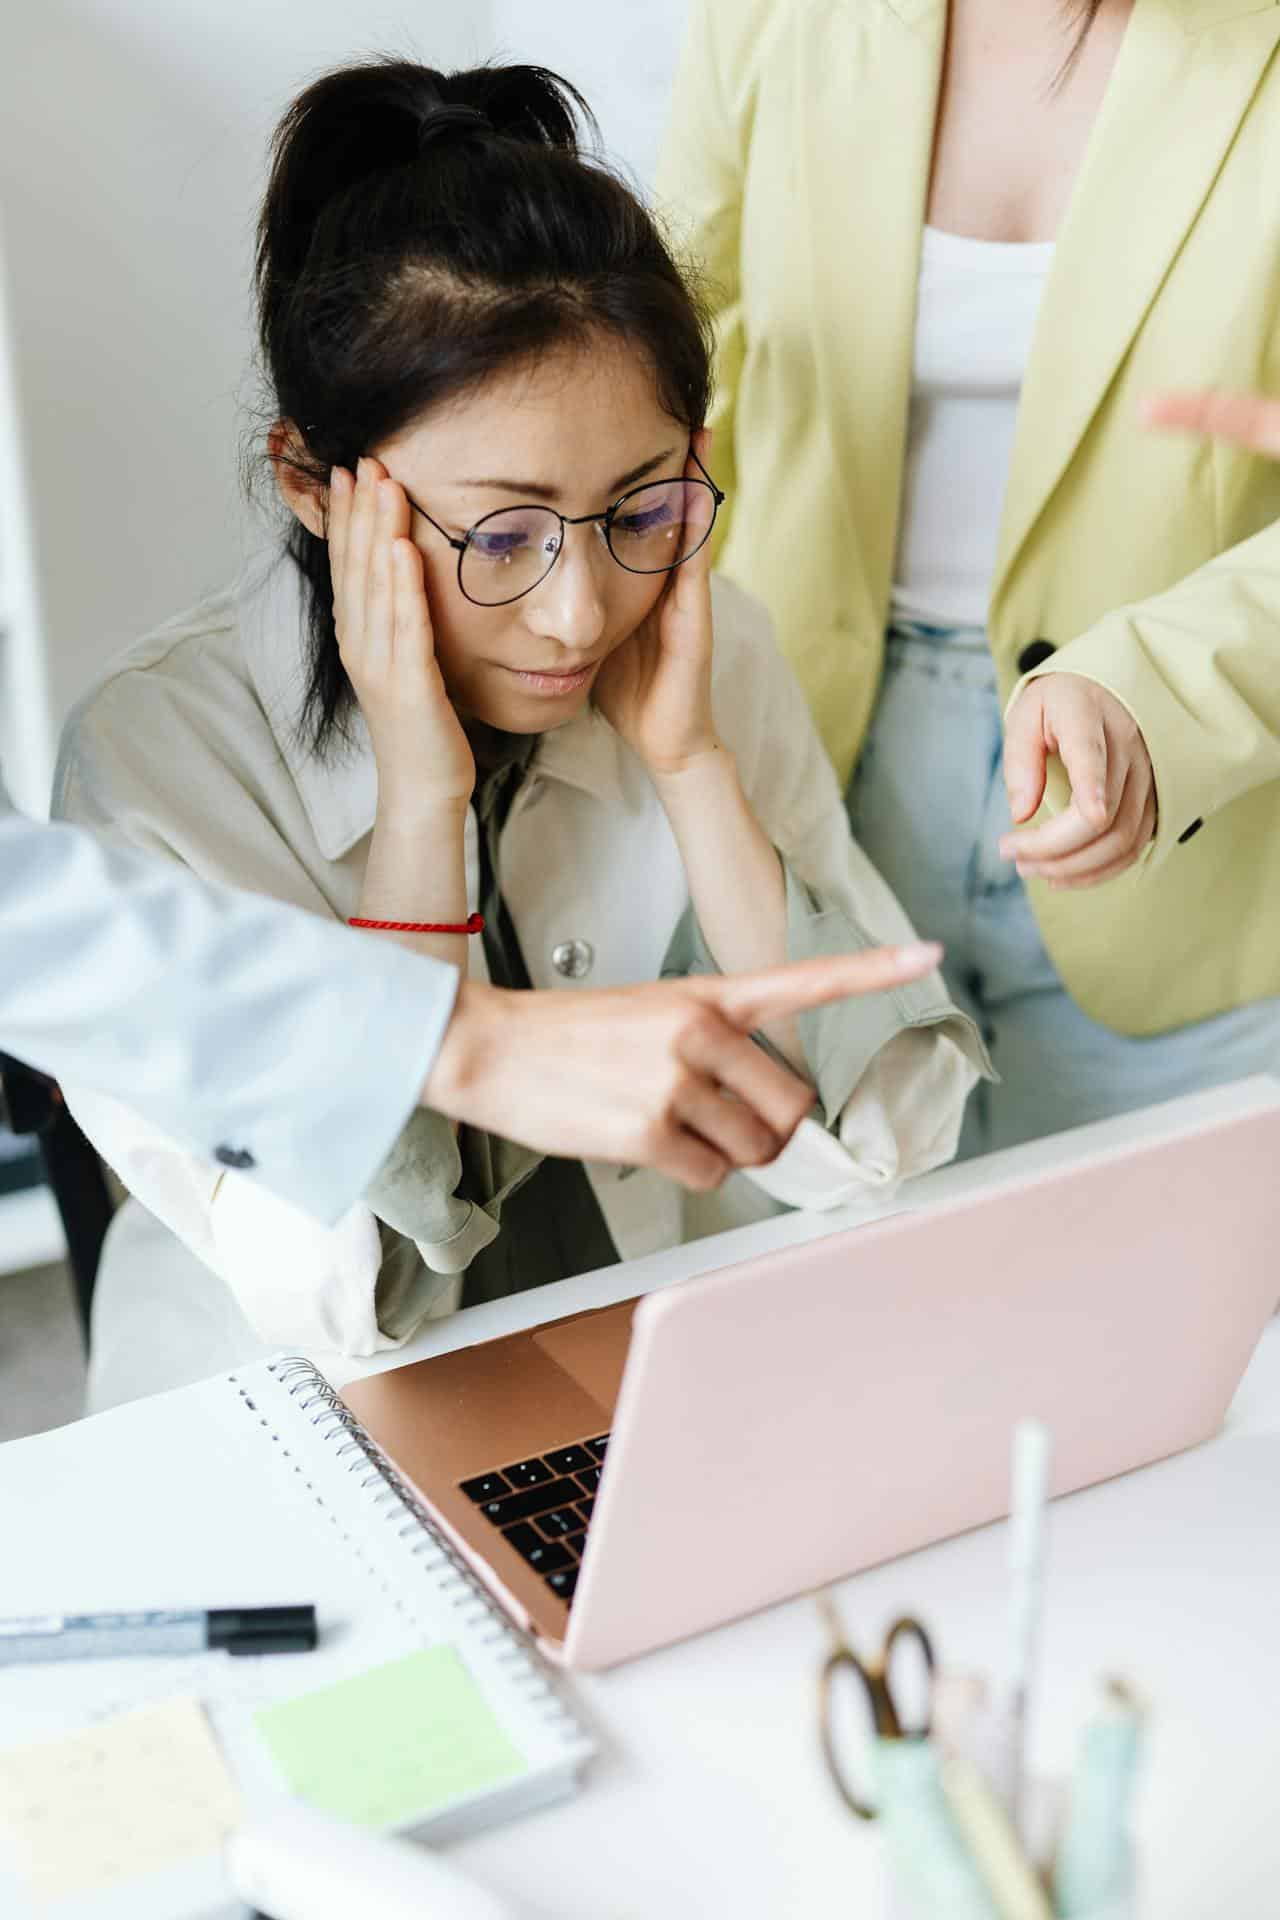 A young Asian woman sits at her laptop with stressed or anxious feelings, while two coworkers stand near her pointing at her laptop, as though criticizing or micromanaging her. 